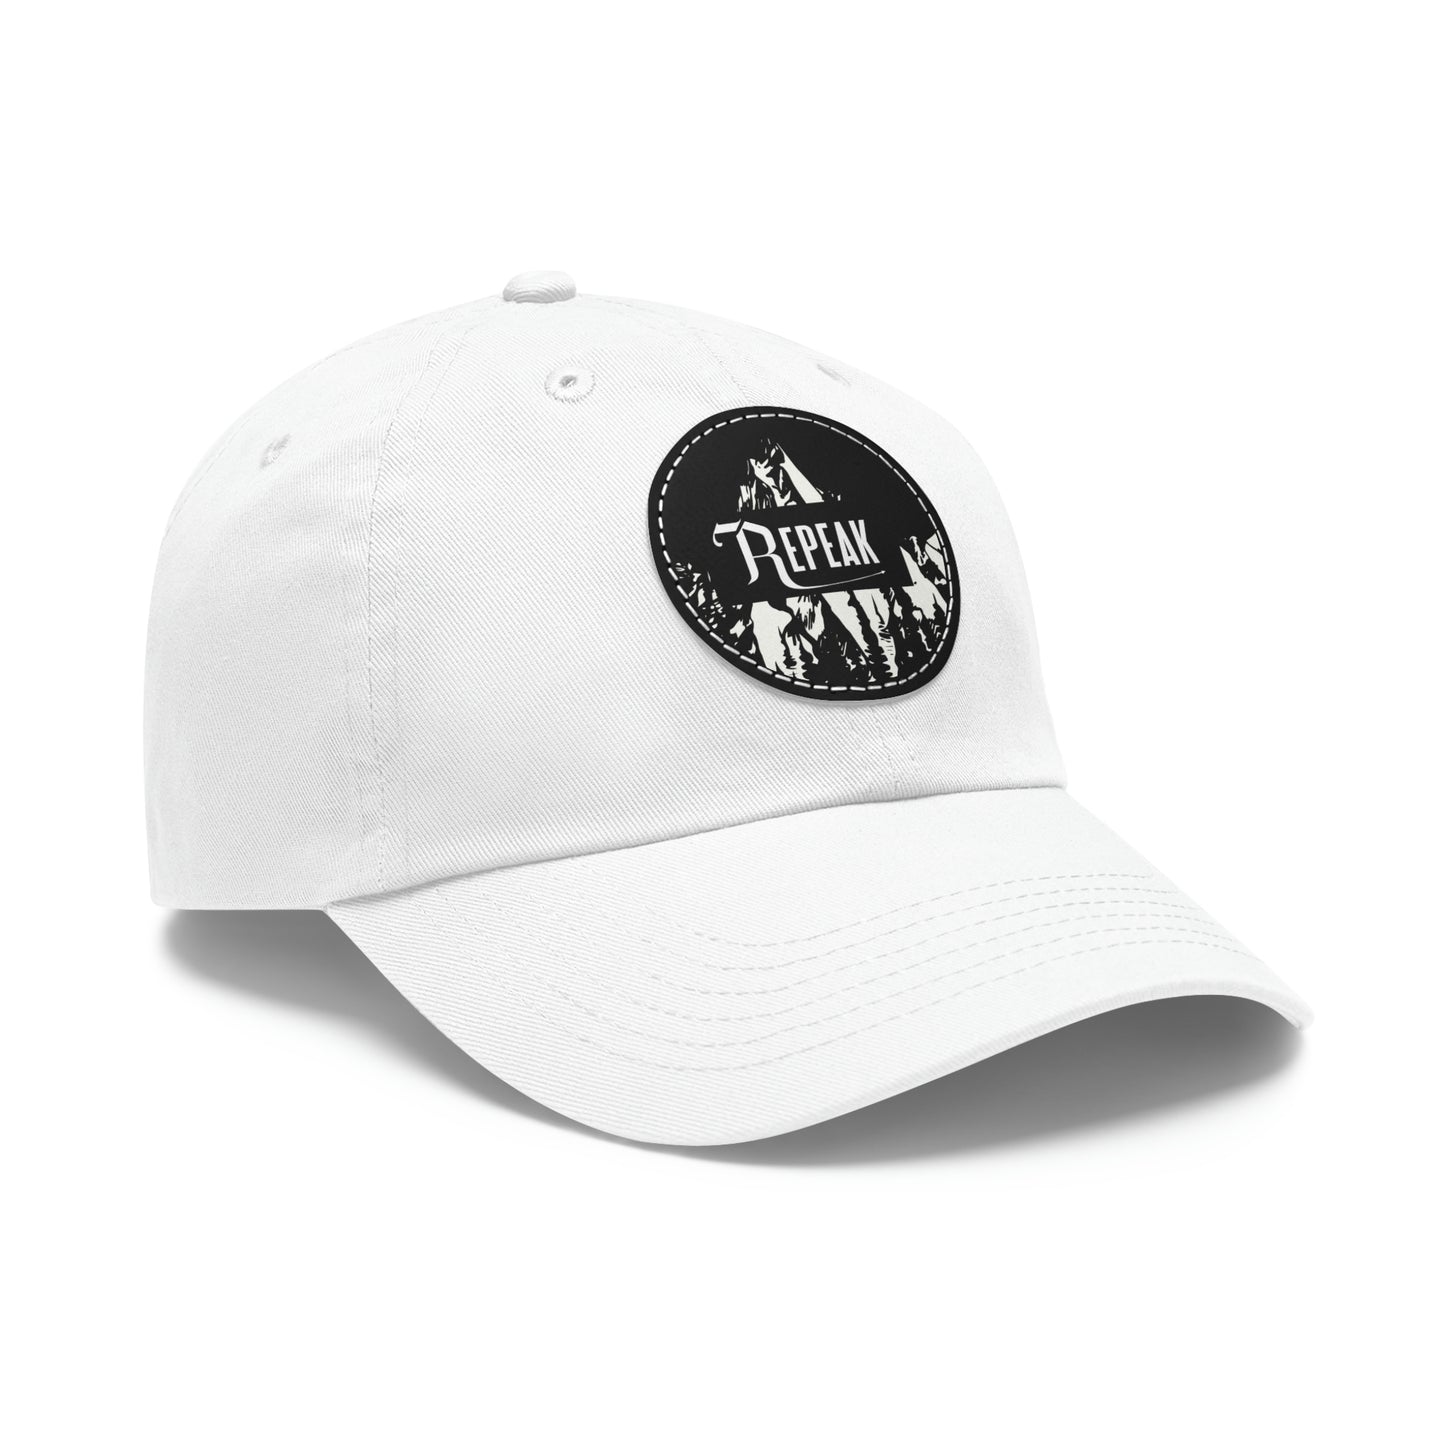 repeak energy dad hat, black and white, side angle